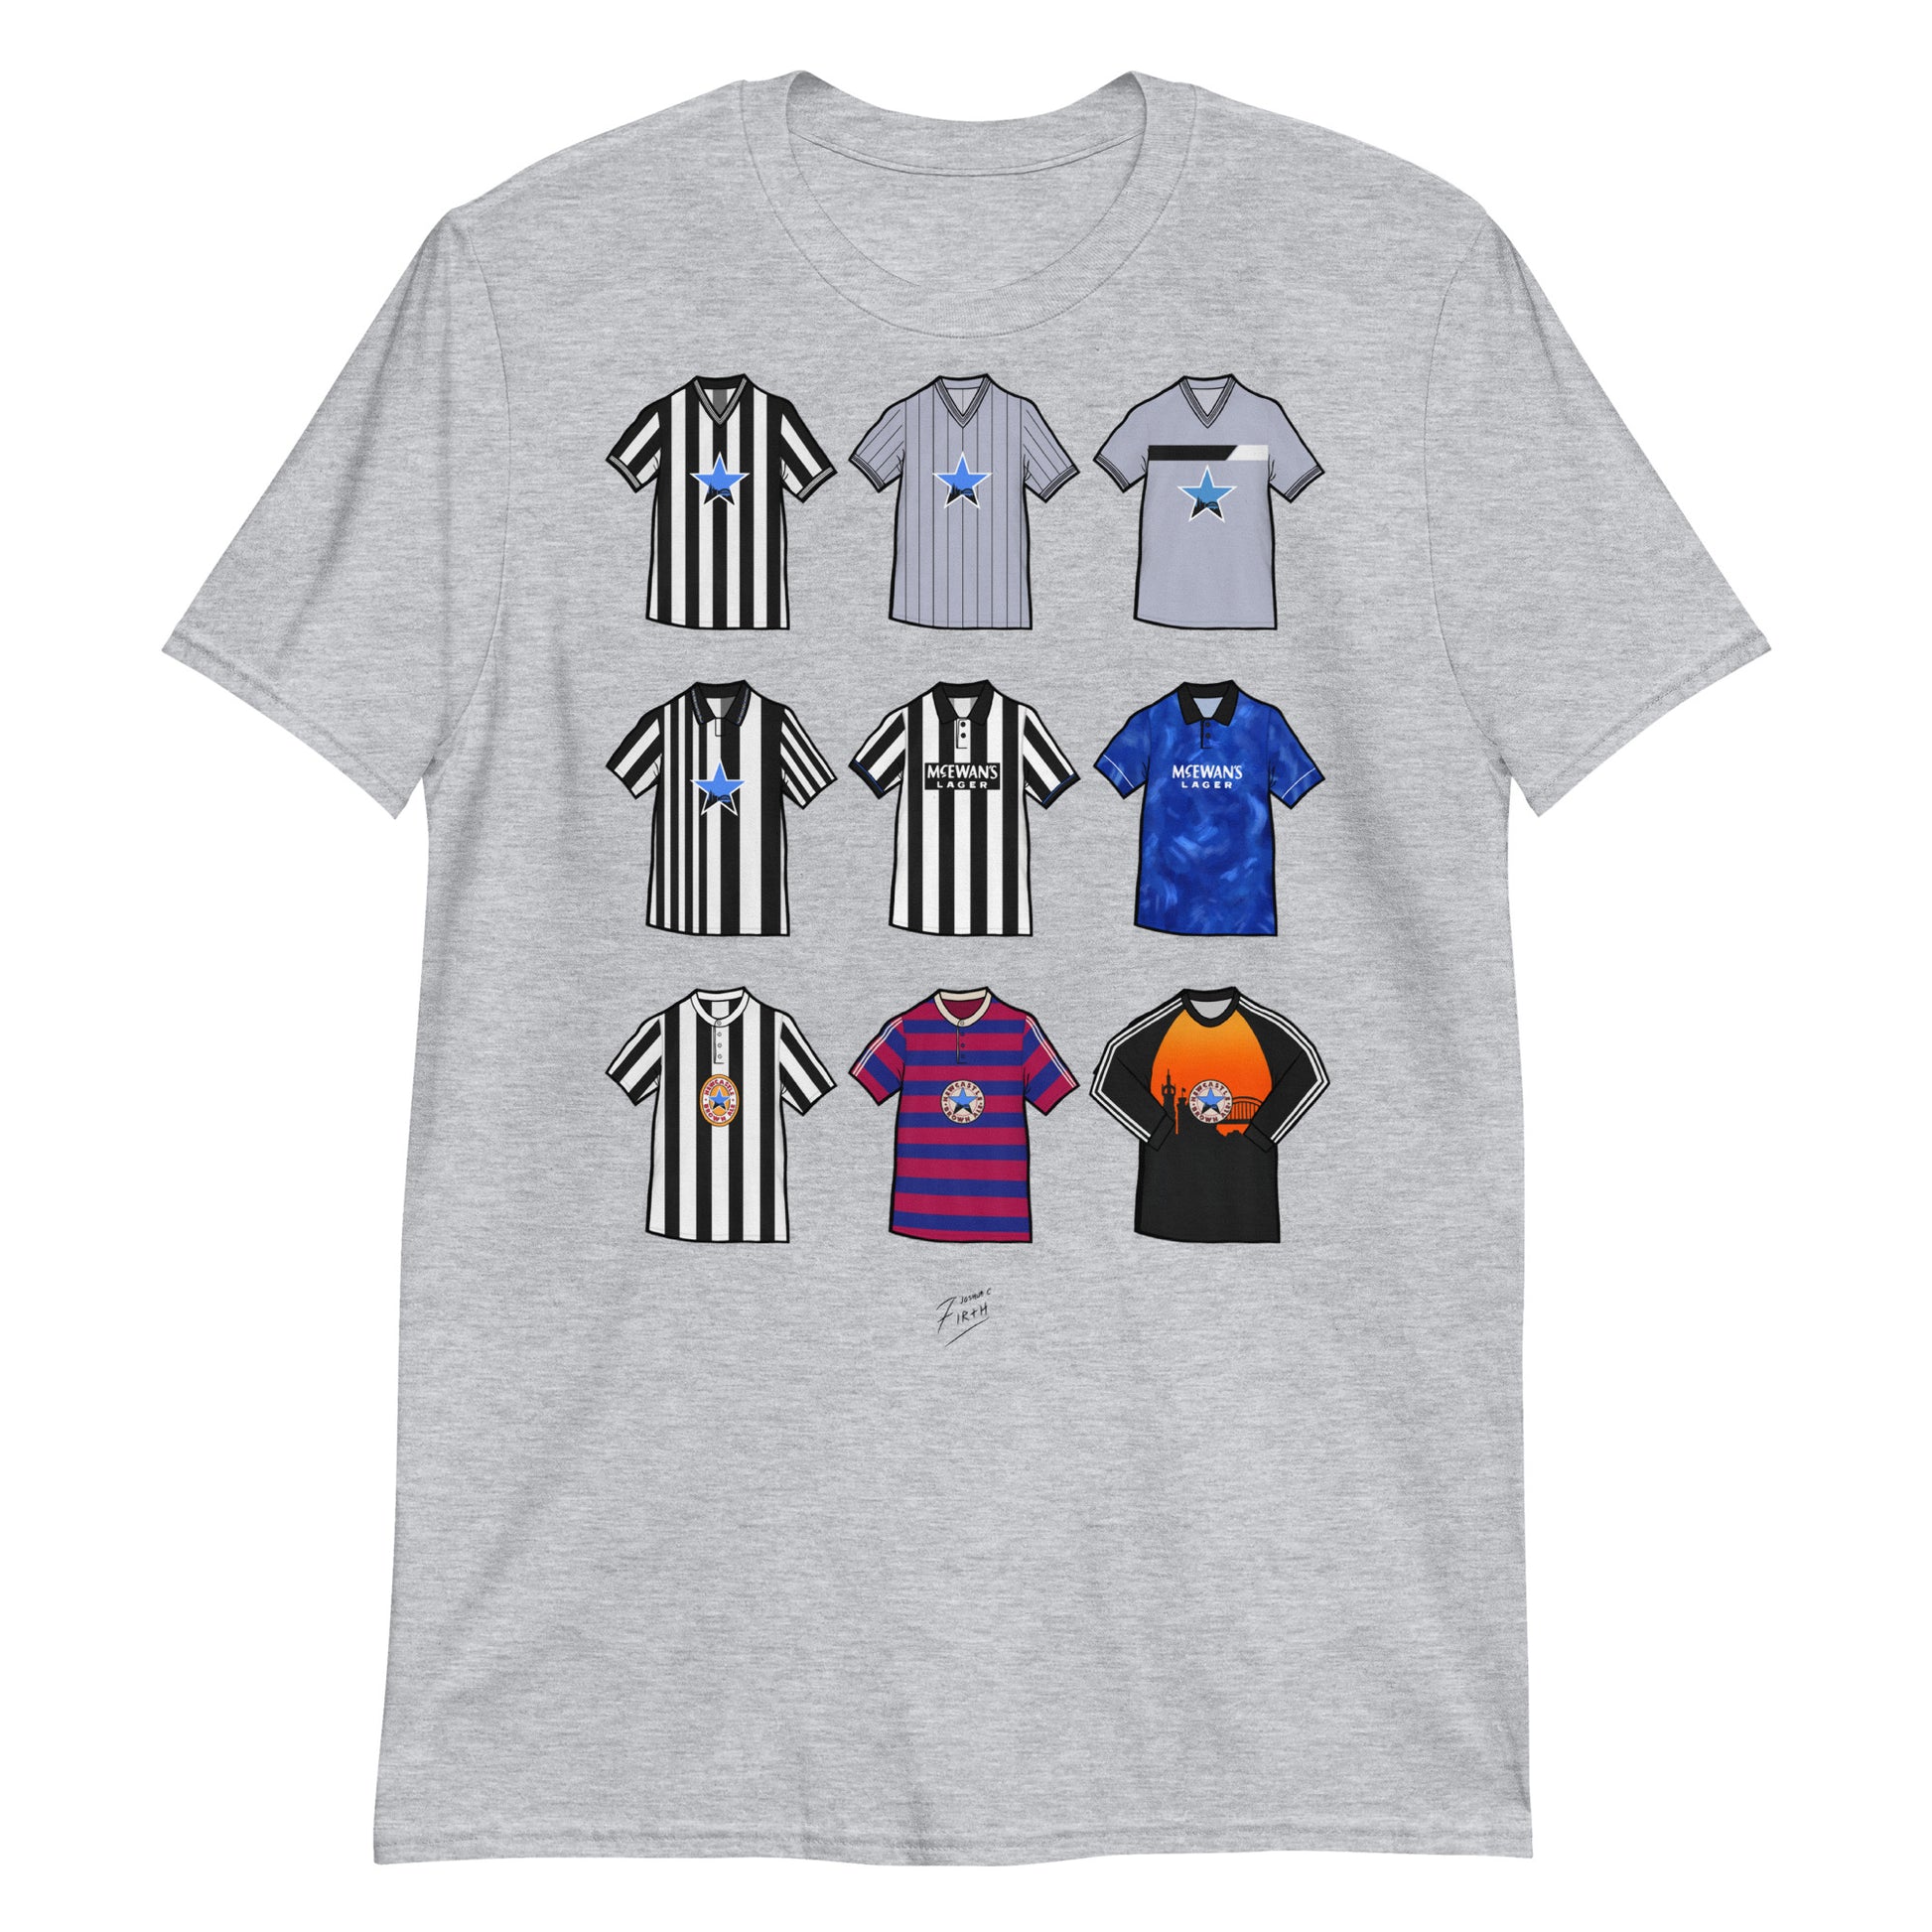 Grey T-shirt inspired by Newcastle United jersey's of the past, retro Iconic designs